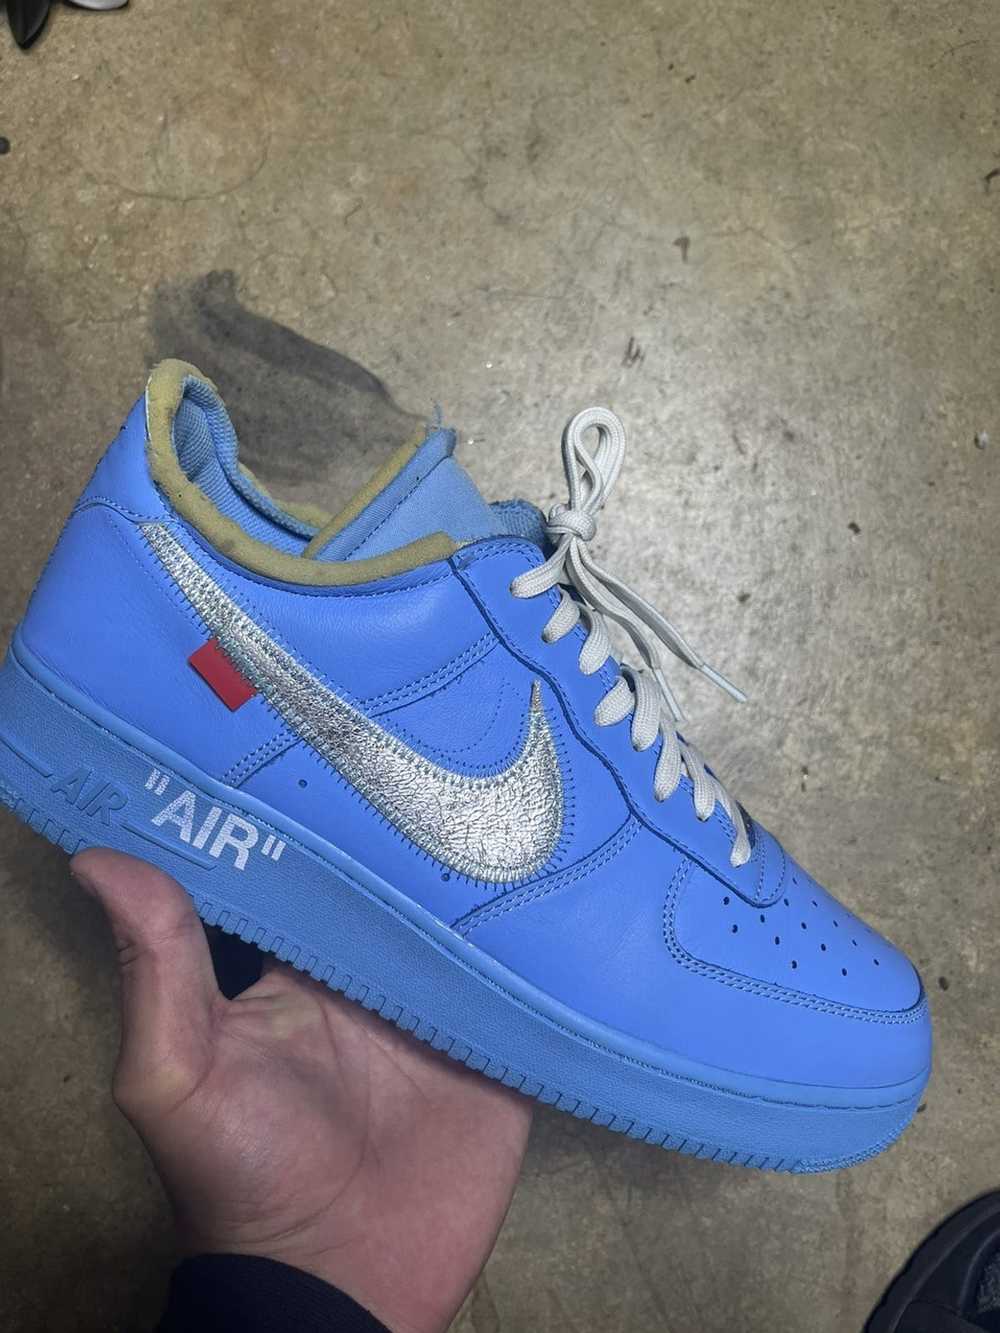 Early look at the “Light Green Spark” Off-White x Nike Air Force 1 🟢⚡